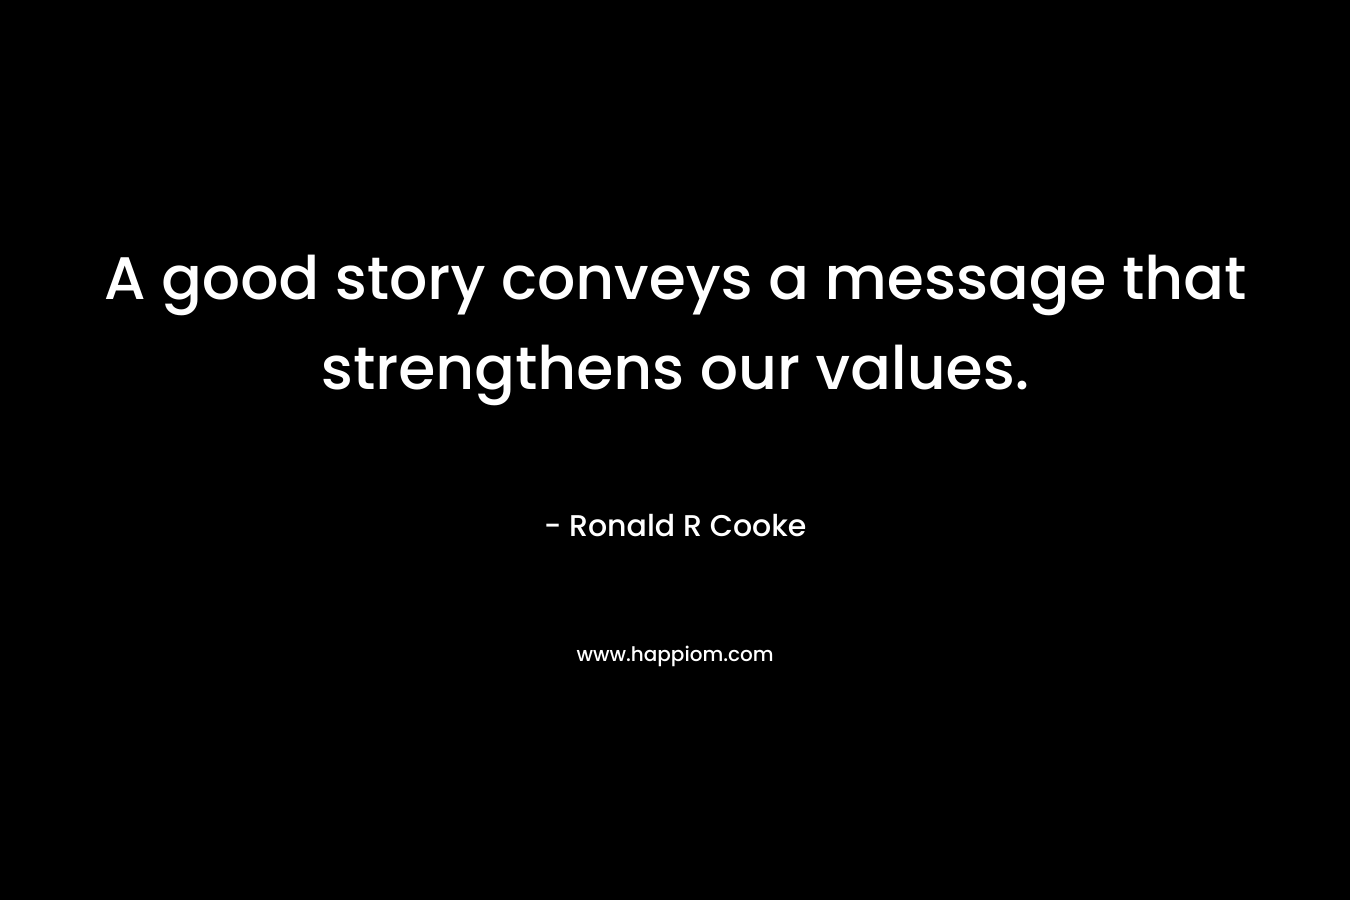 A good story conveys a message that strengthens our values.